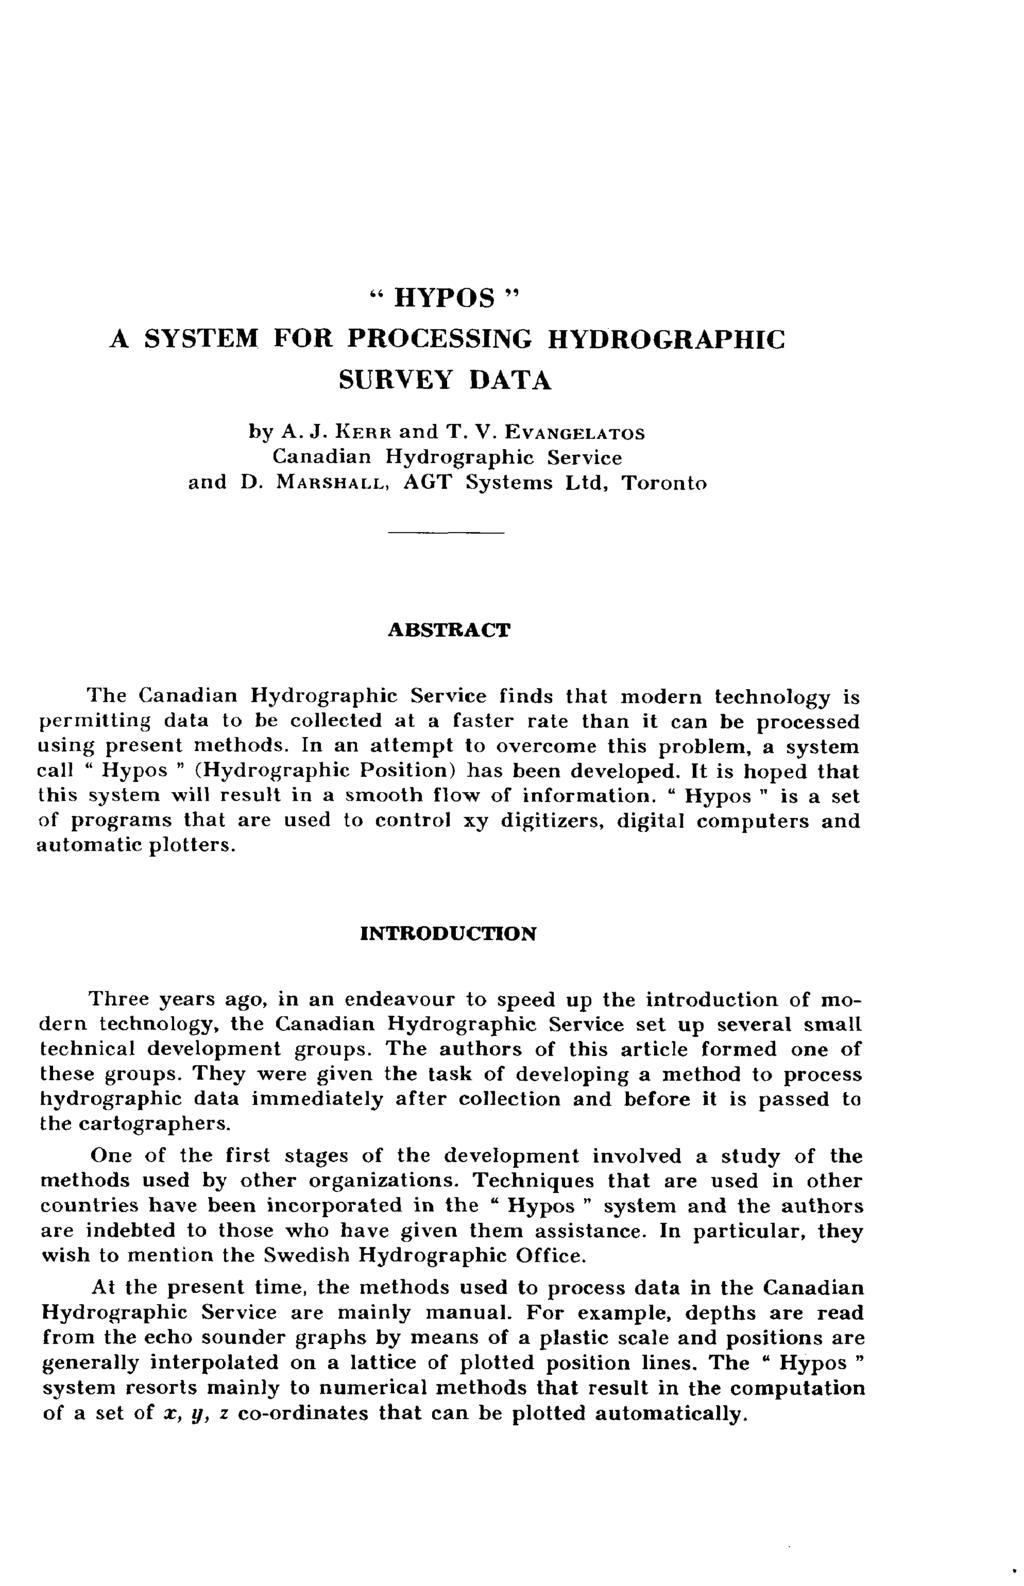 H Y PO S A SYSTEM FOR PROCESSING HYDROGRAPHIC SURVEY DATA by A. J. K e r r and T. V. E v a n g e l a t o s Canadian H ydrographic Service and D.